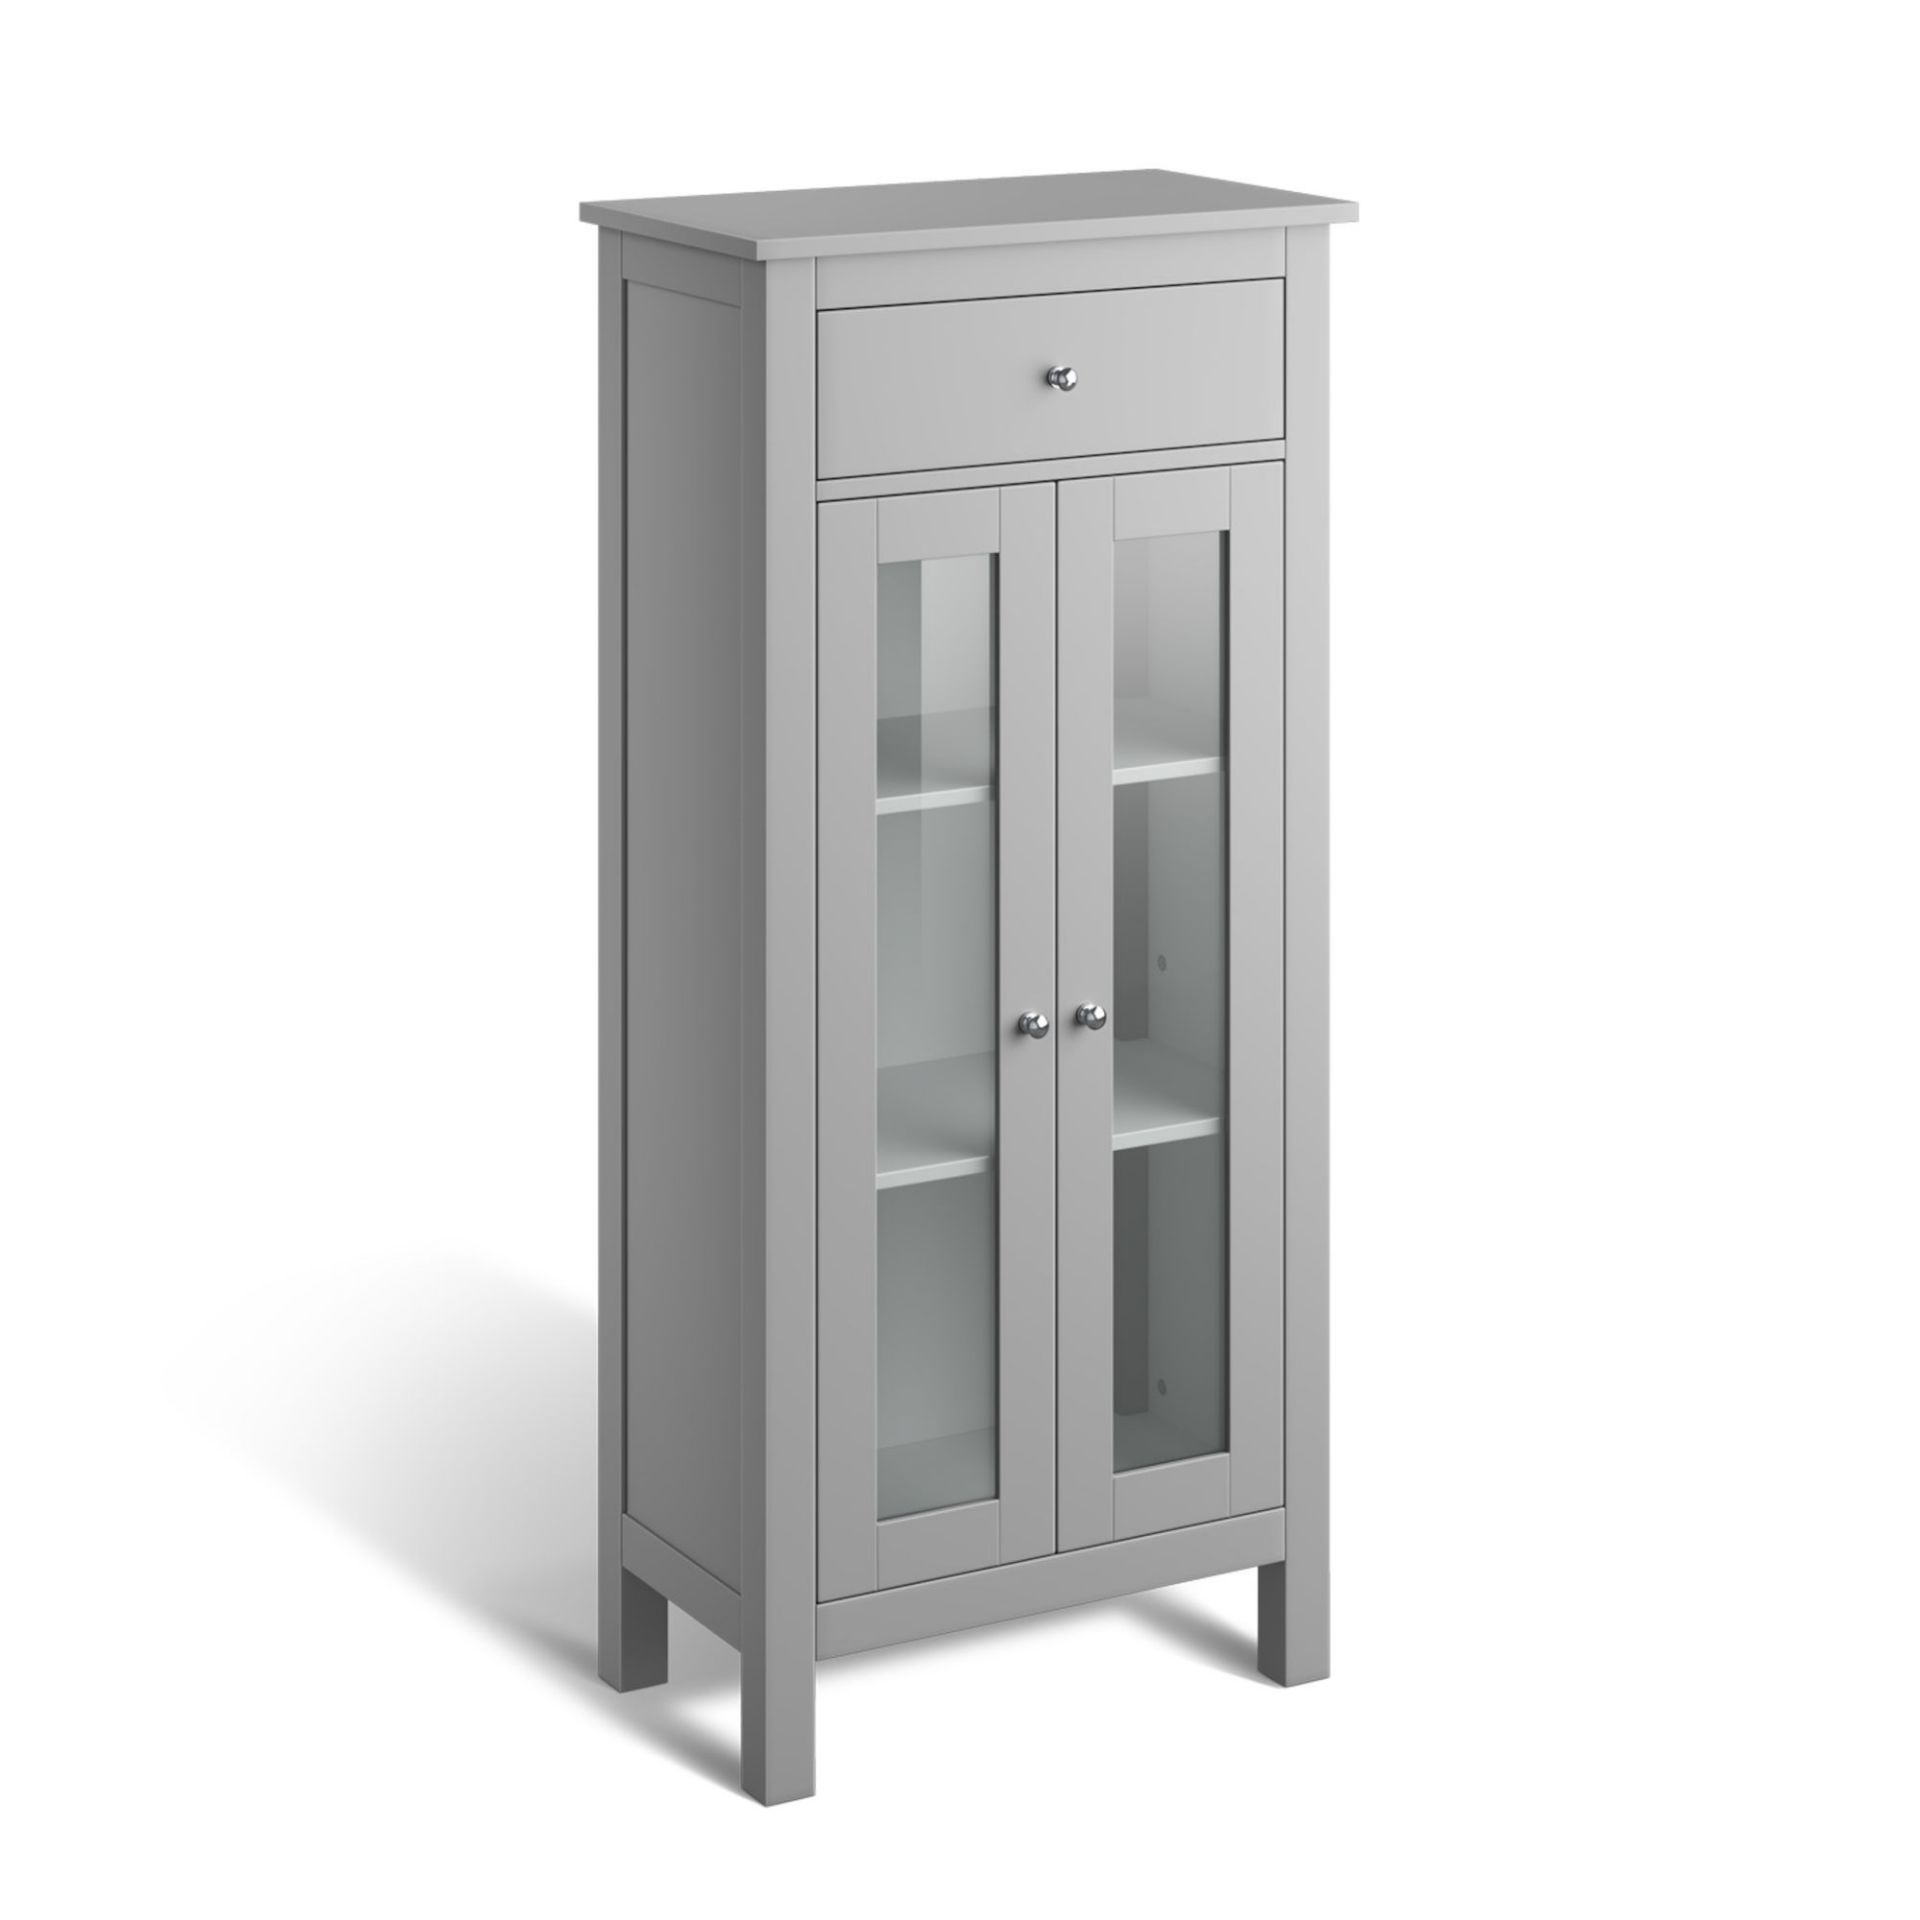 (KL16) 1400mm Earl Grey Melbourne Tall Storage Cabinet. RRP £299.99. The newest addition to the - Image 2 of 6